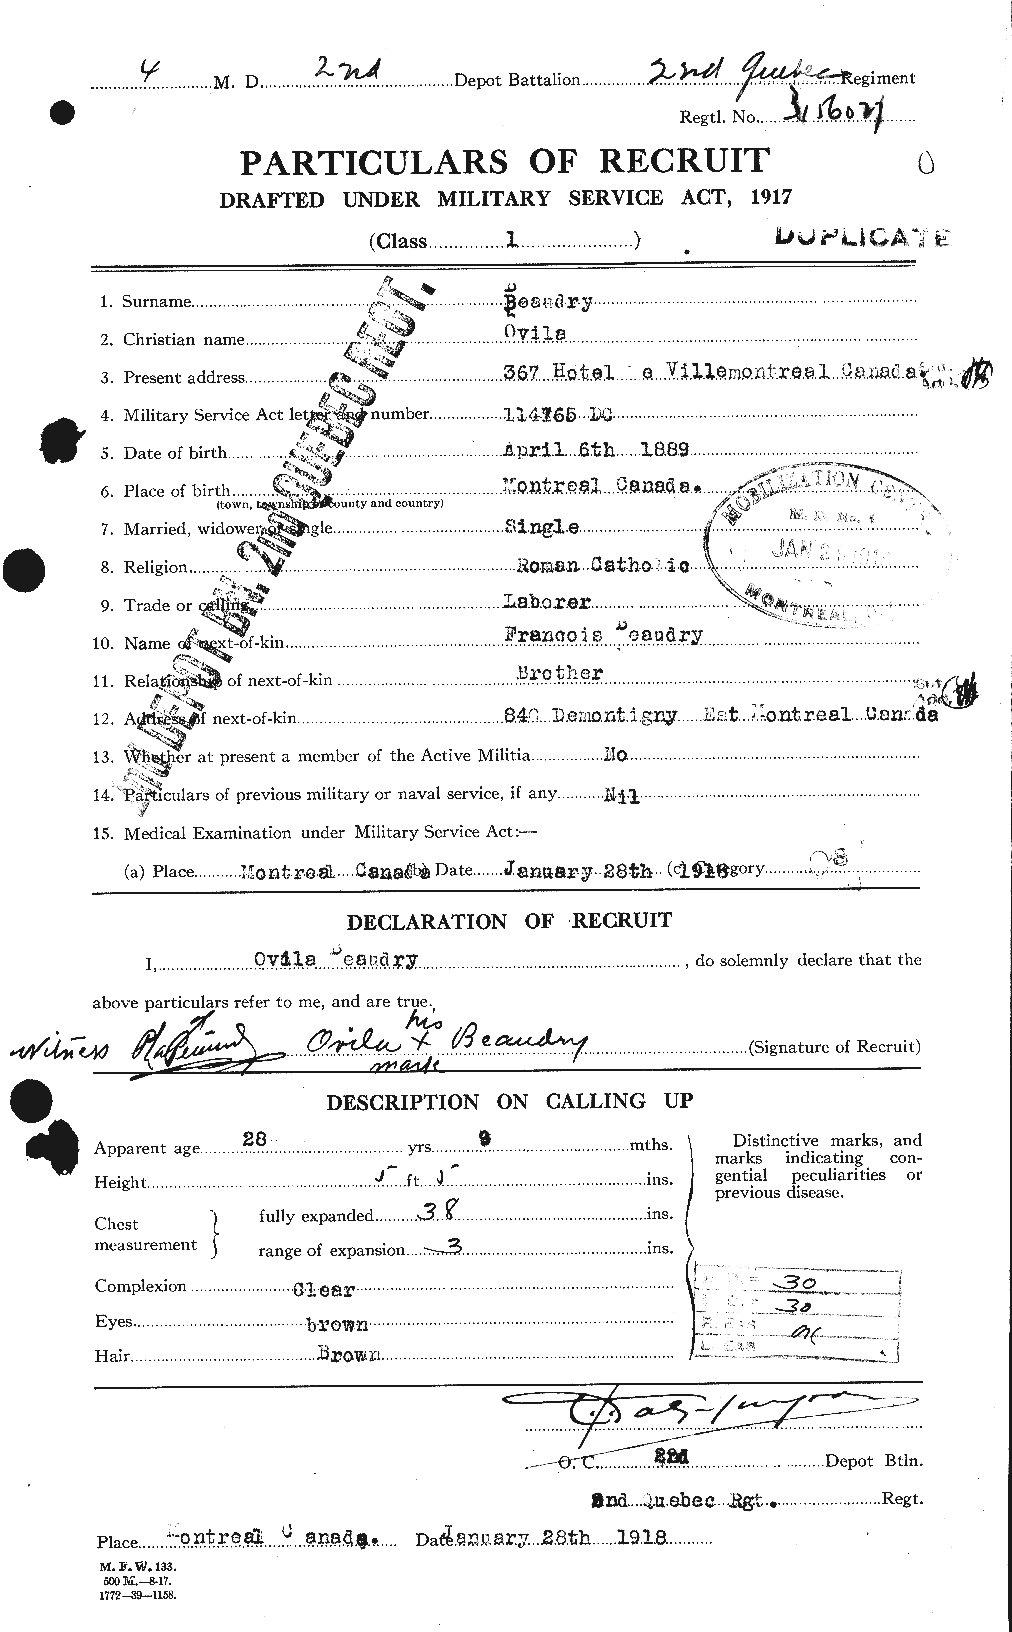 Personnel Records of the First World War - CEF 231397a